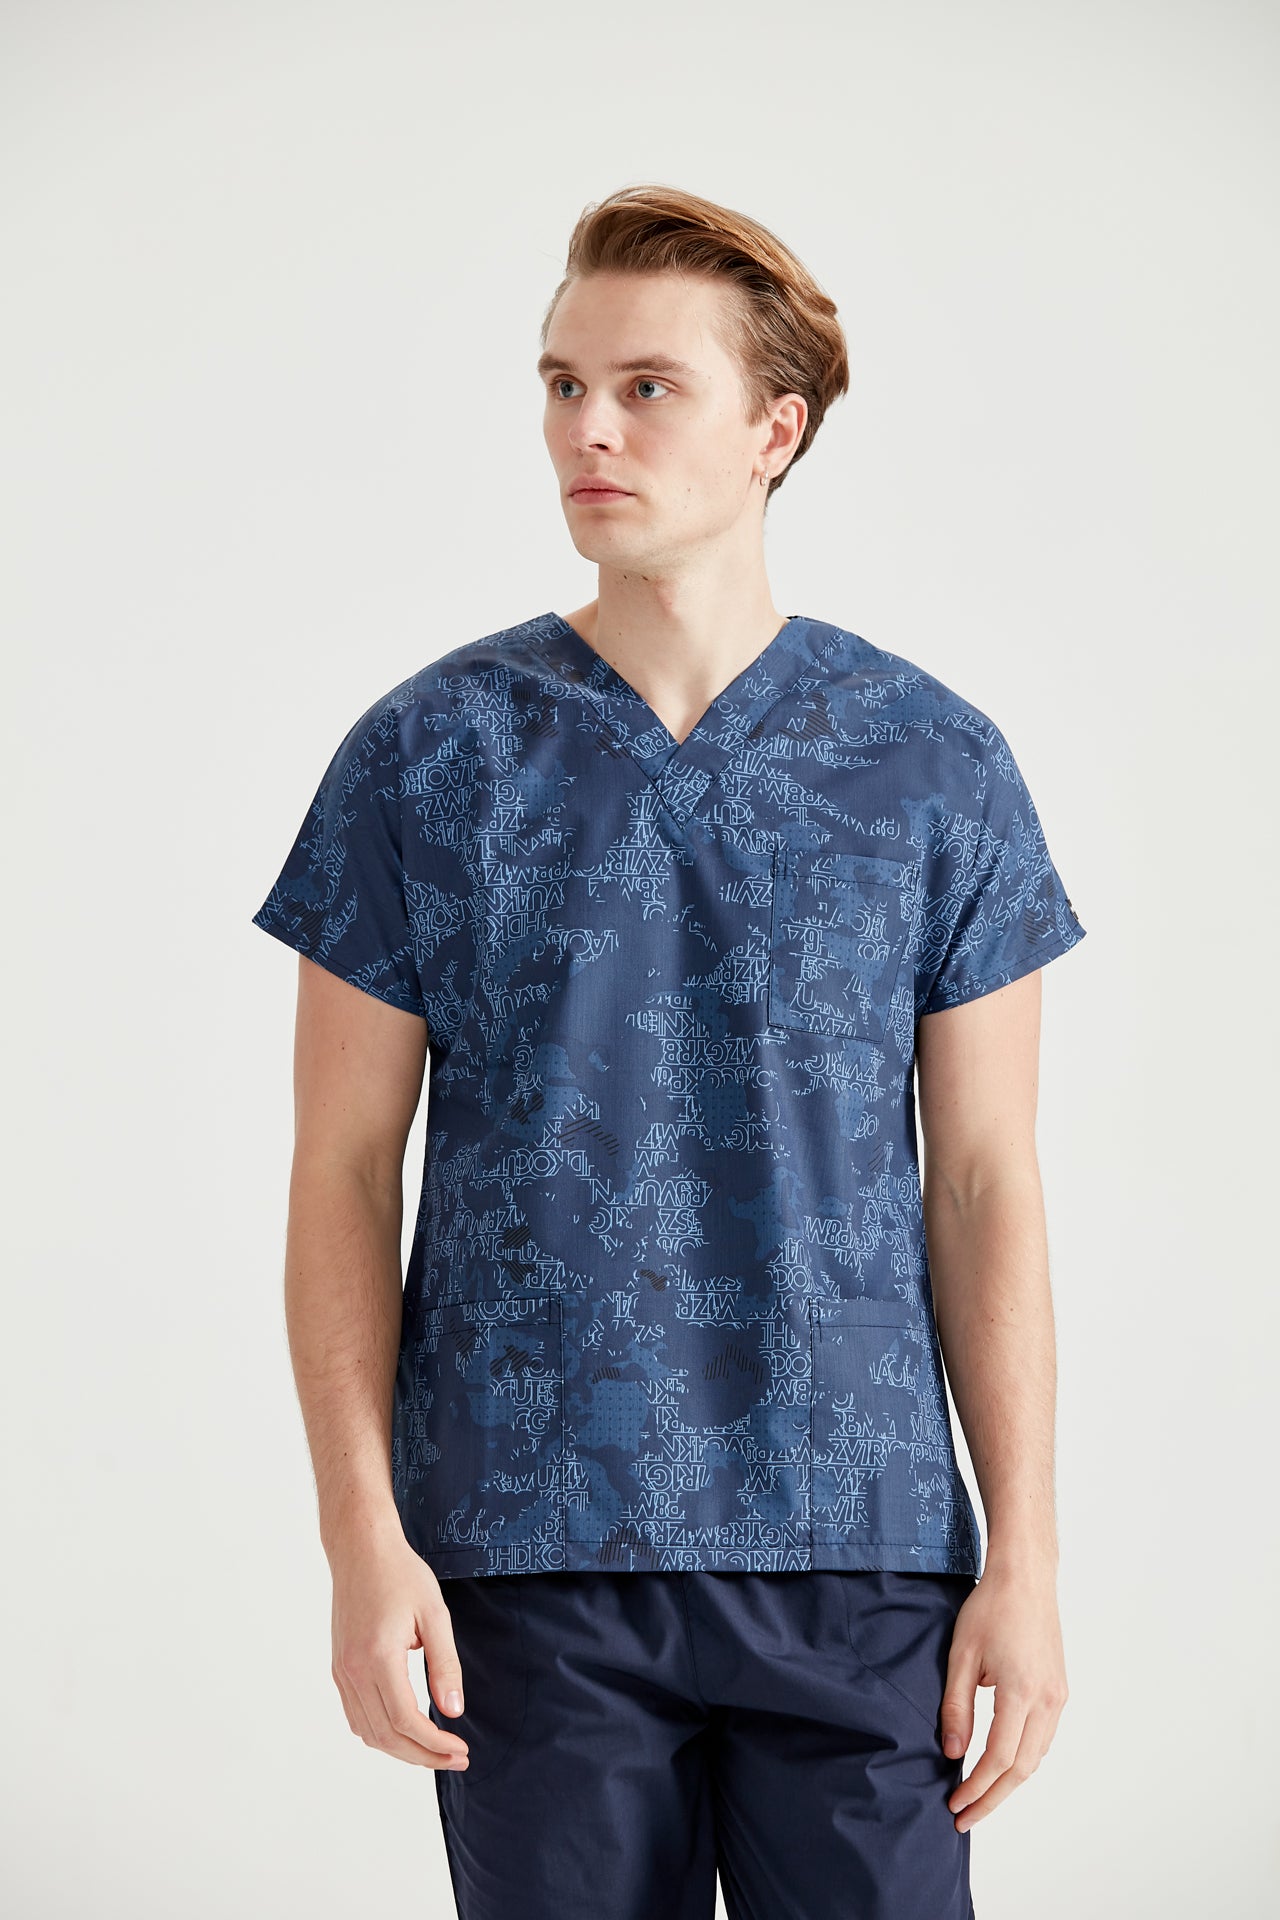 Asistent medical imbracat in bluza medicala Camouflage Bleumarin, vedere din fata